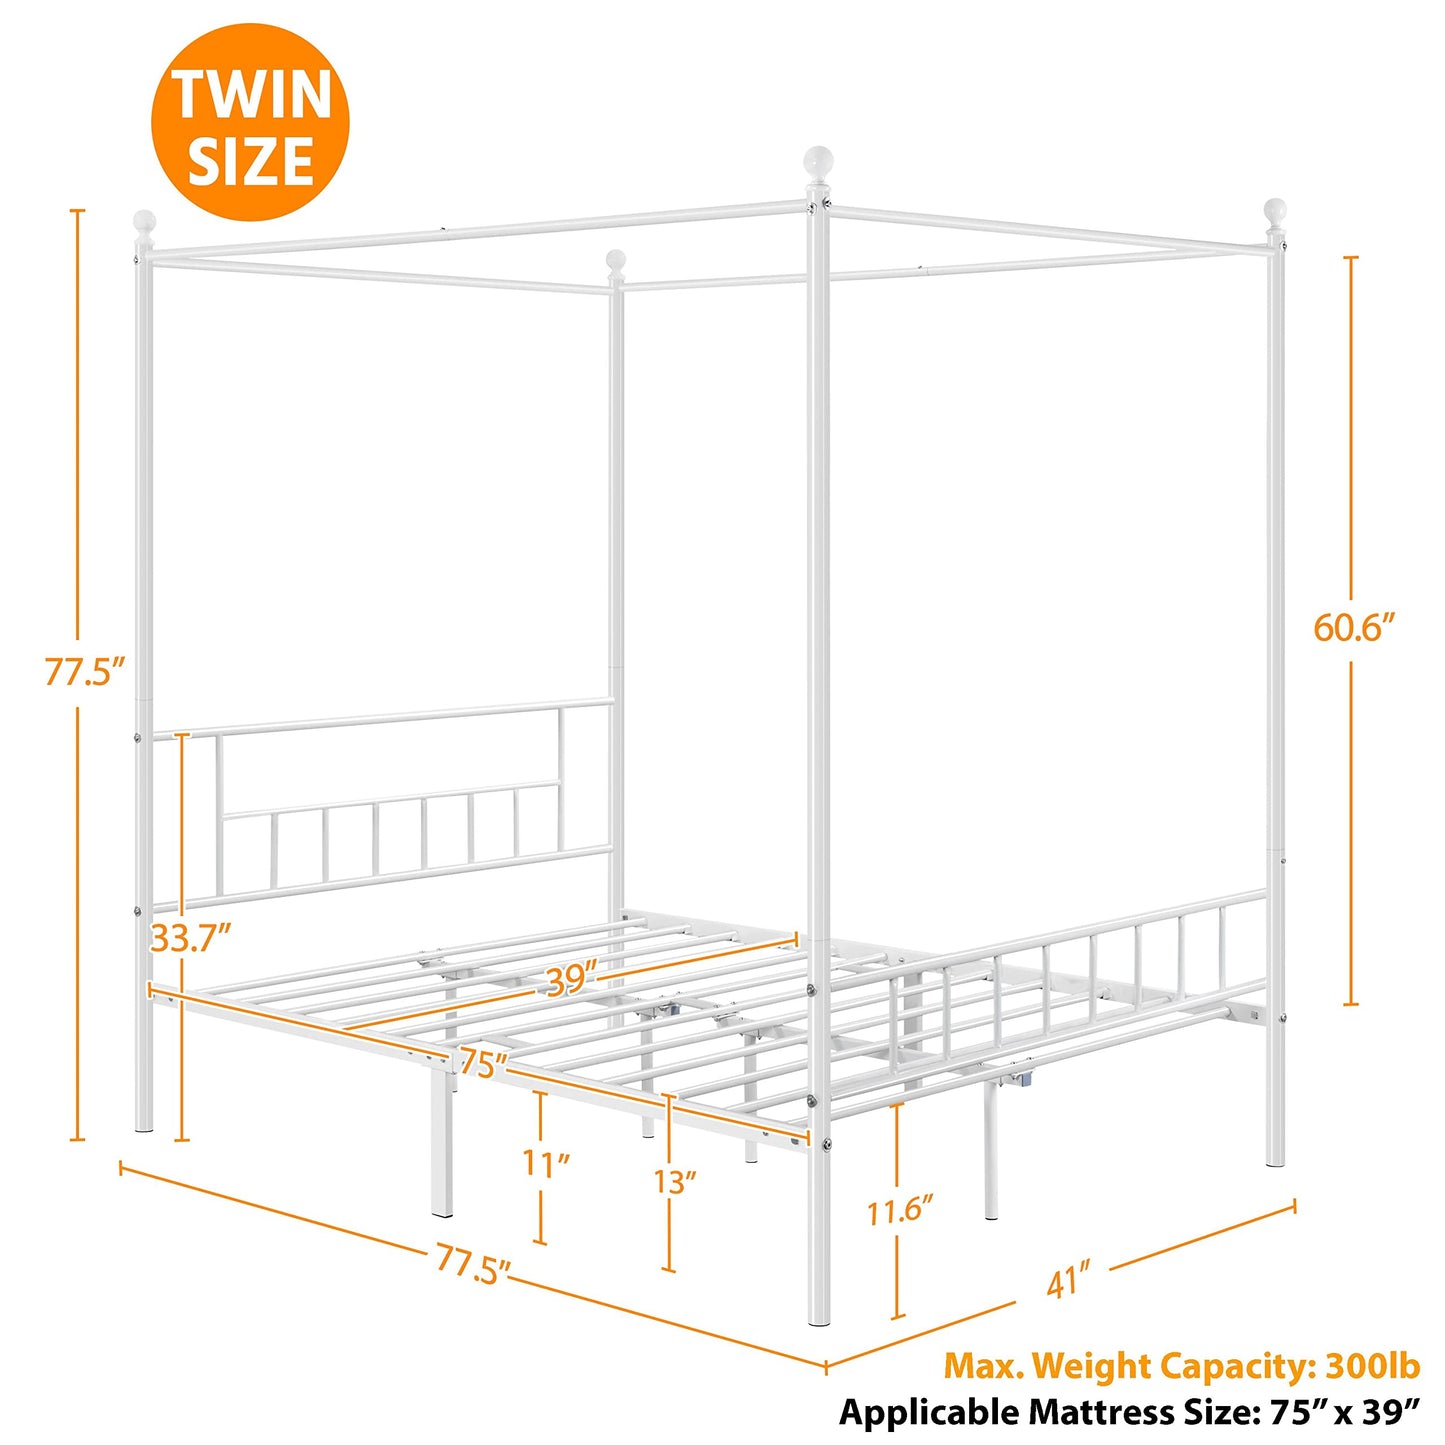 Topeakmart White Four-Poster Canopy Metal Bed Frame with Headboard and Footboard Sturdy Slatted Structure No Box Spring Needed Twin Size